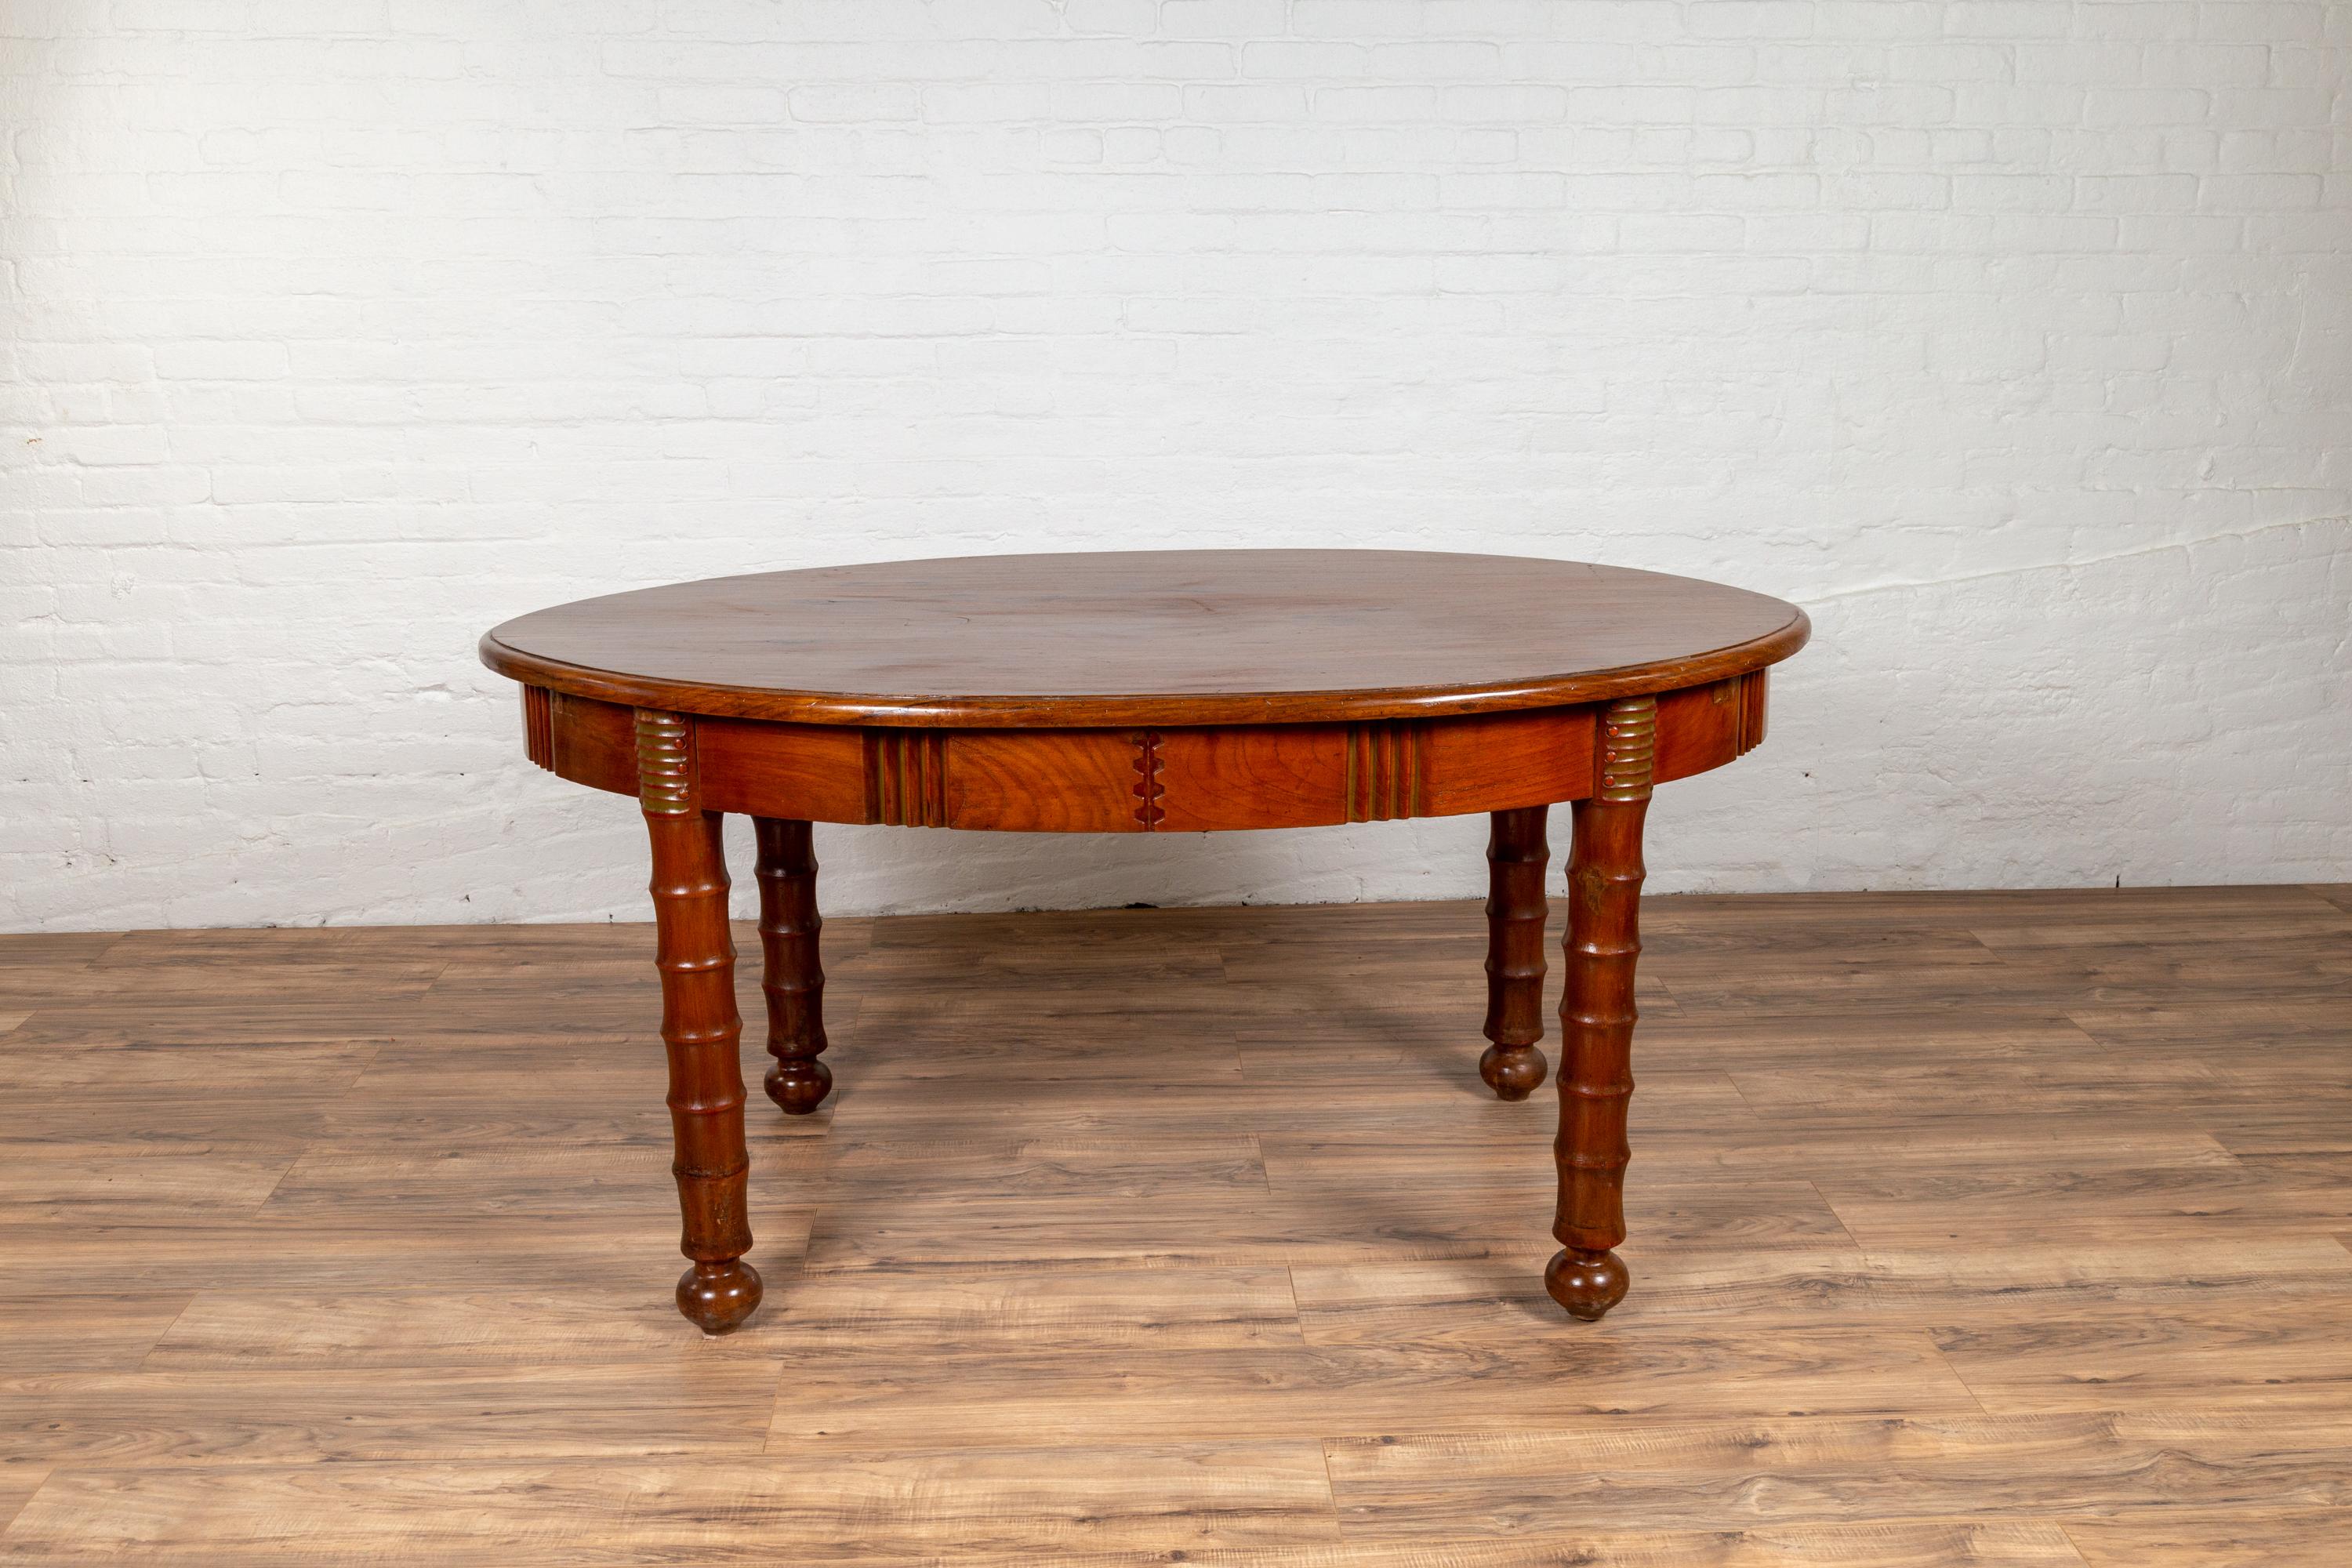 Turned Antique Oval Dining Room Table from Indonesia with Spindle Legs and Warm Patina For Sale